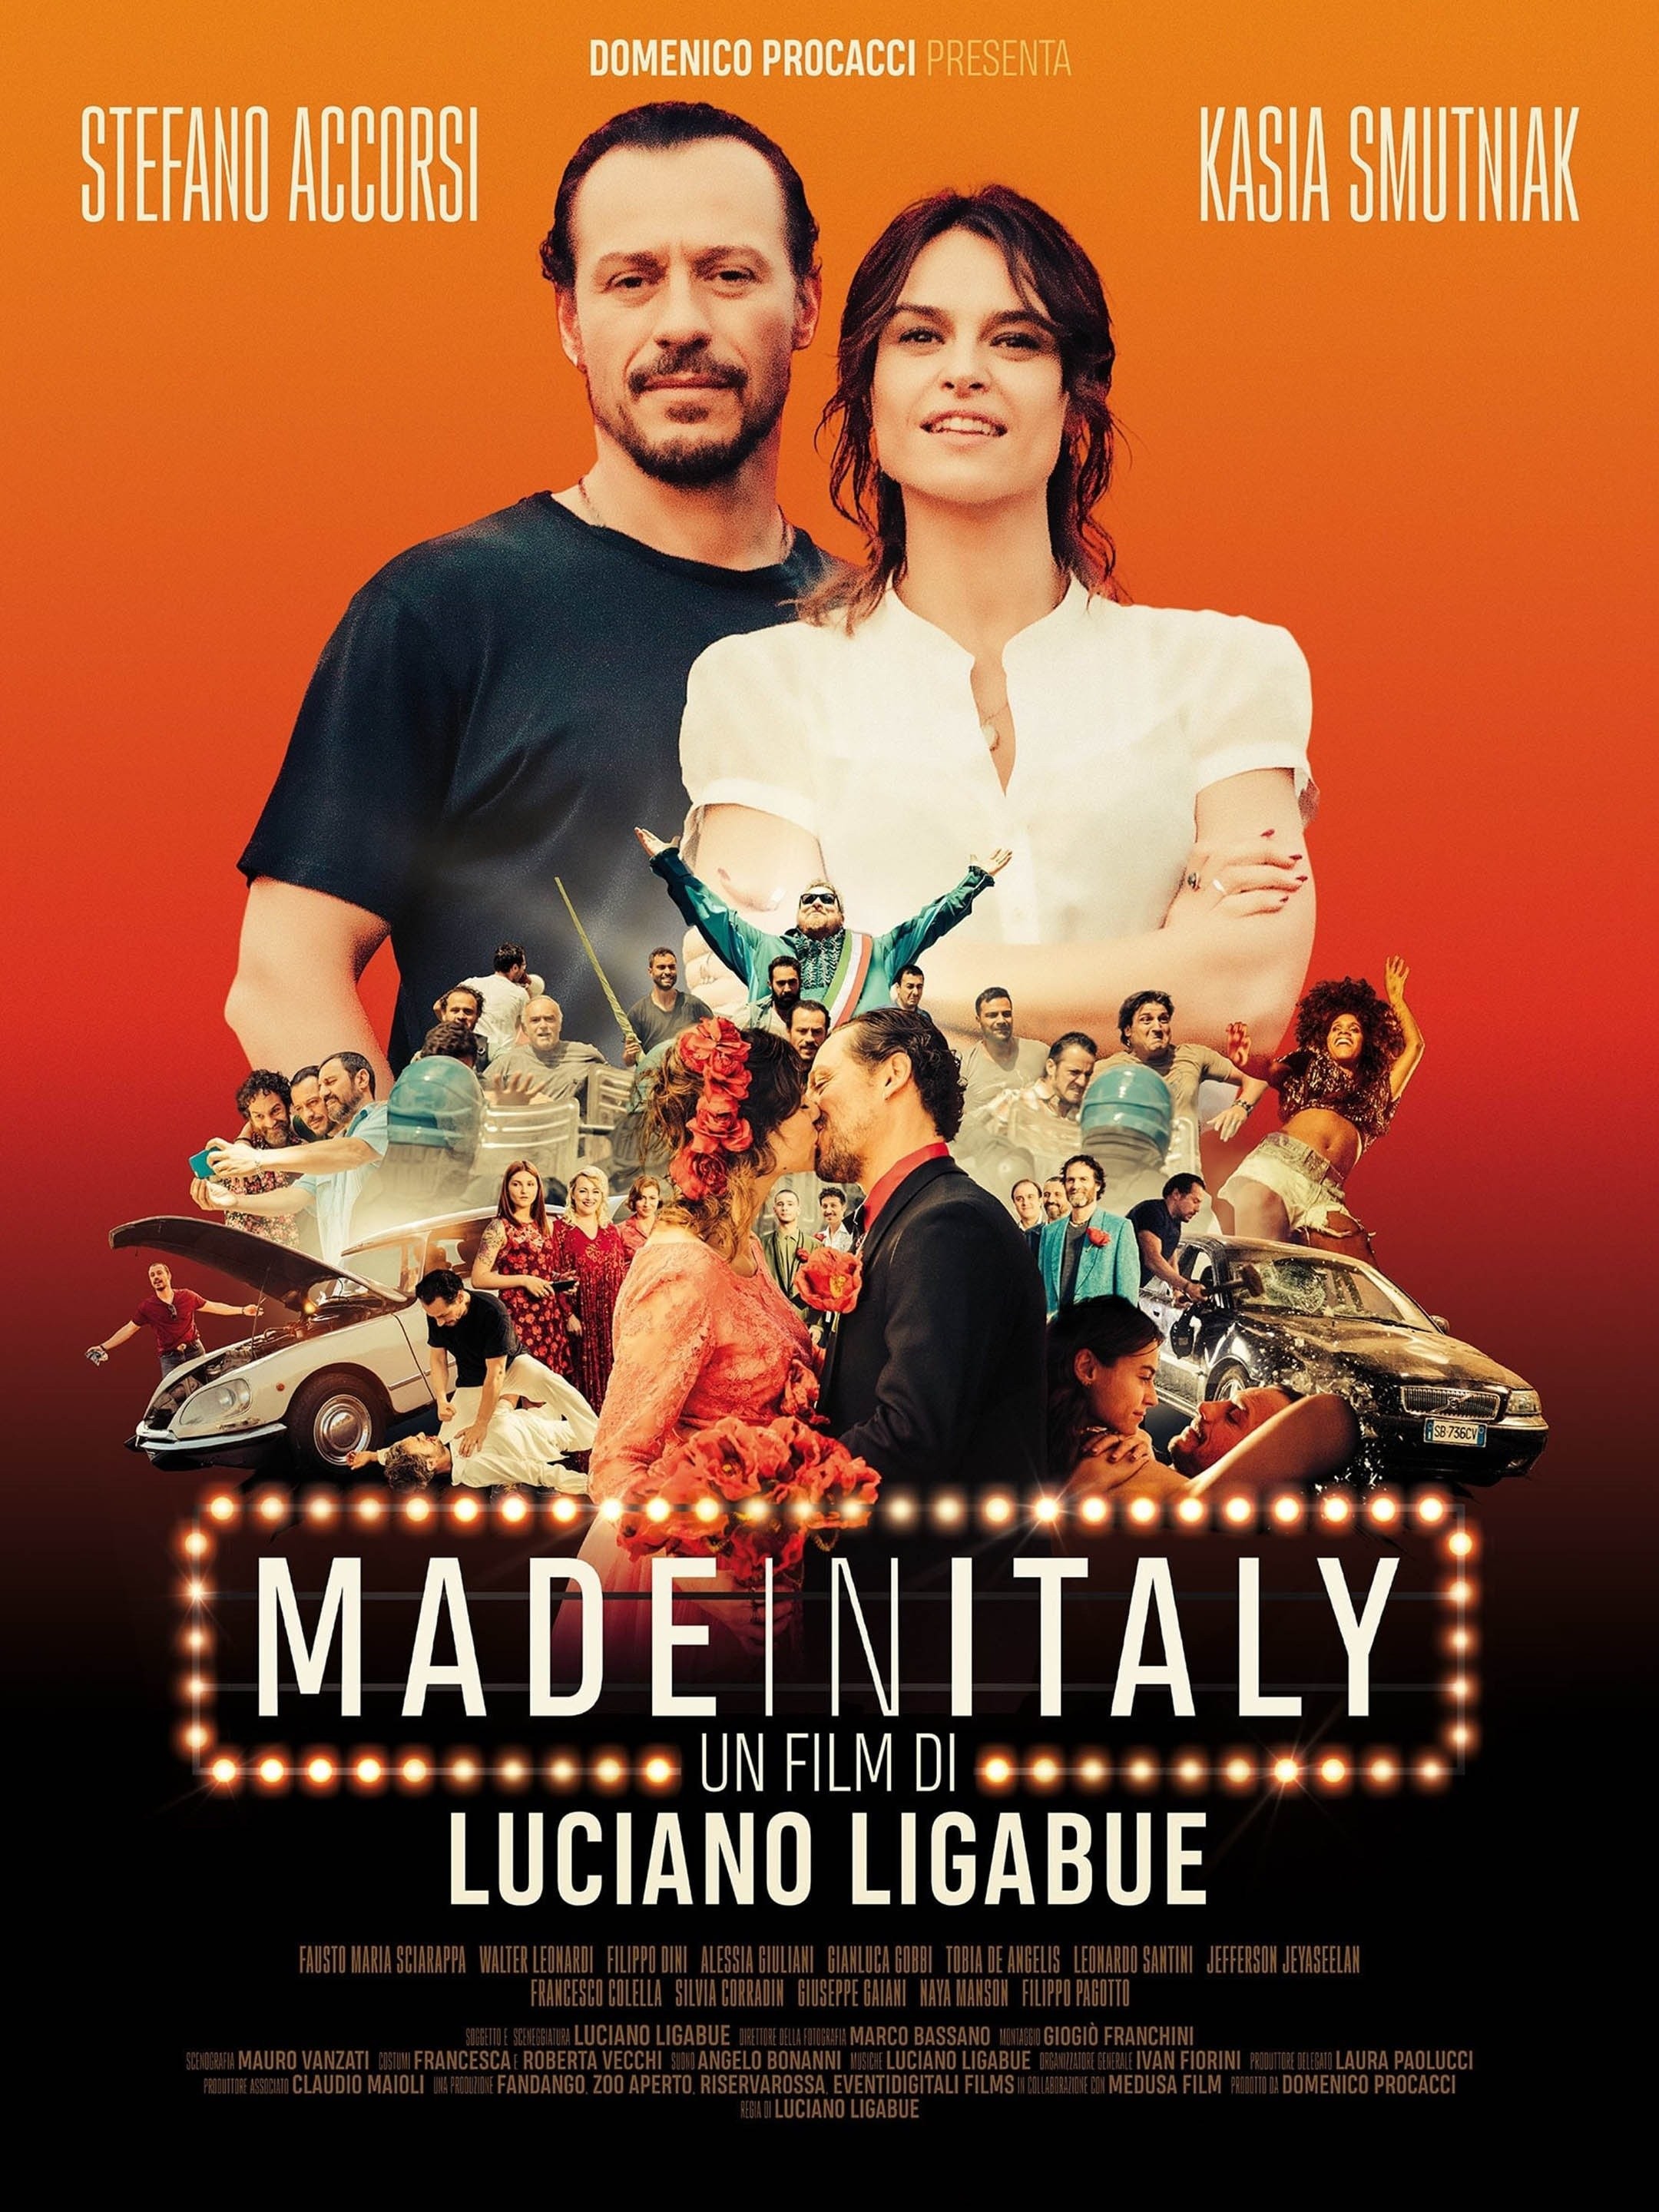 Made in Italy | Rotten Tomatoes